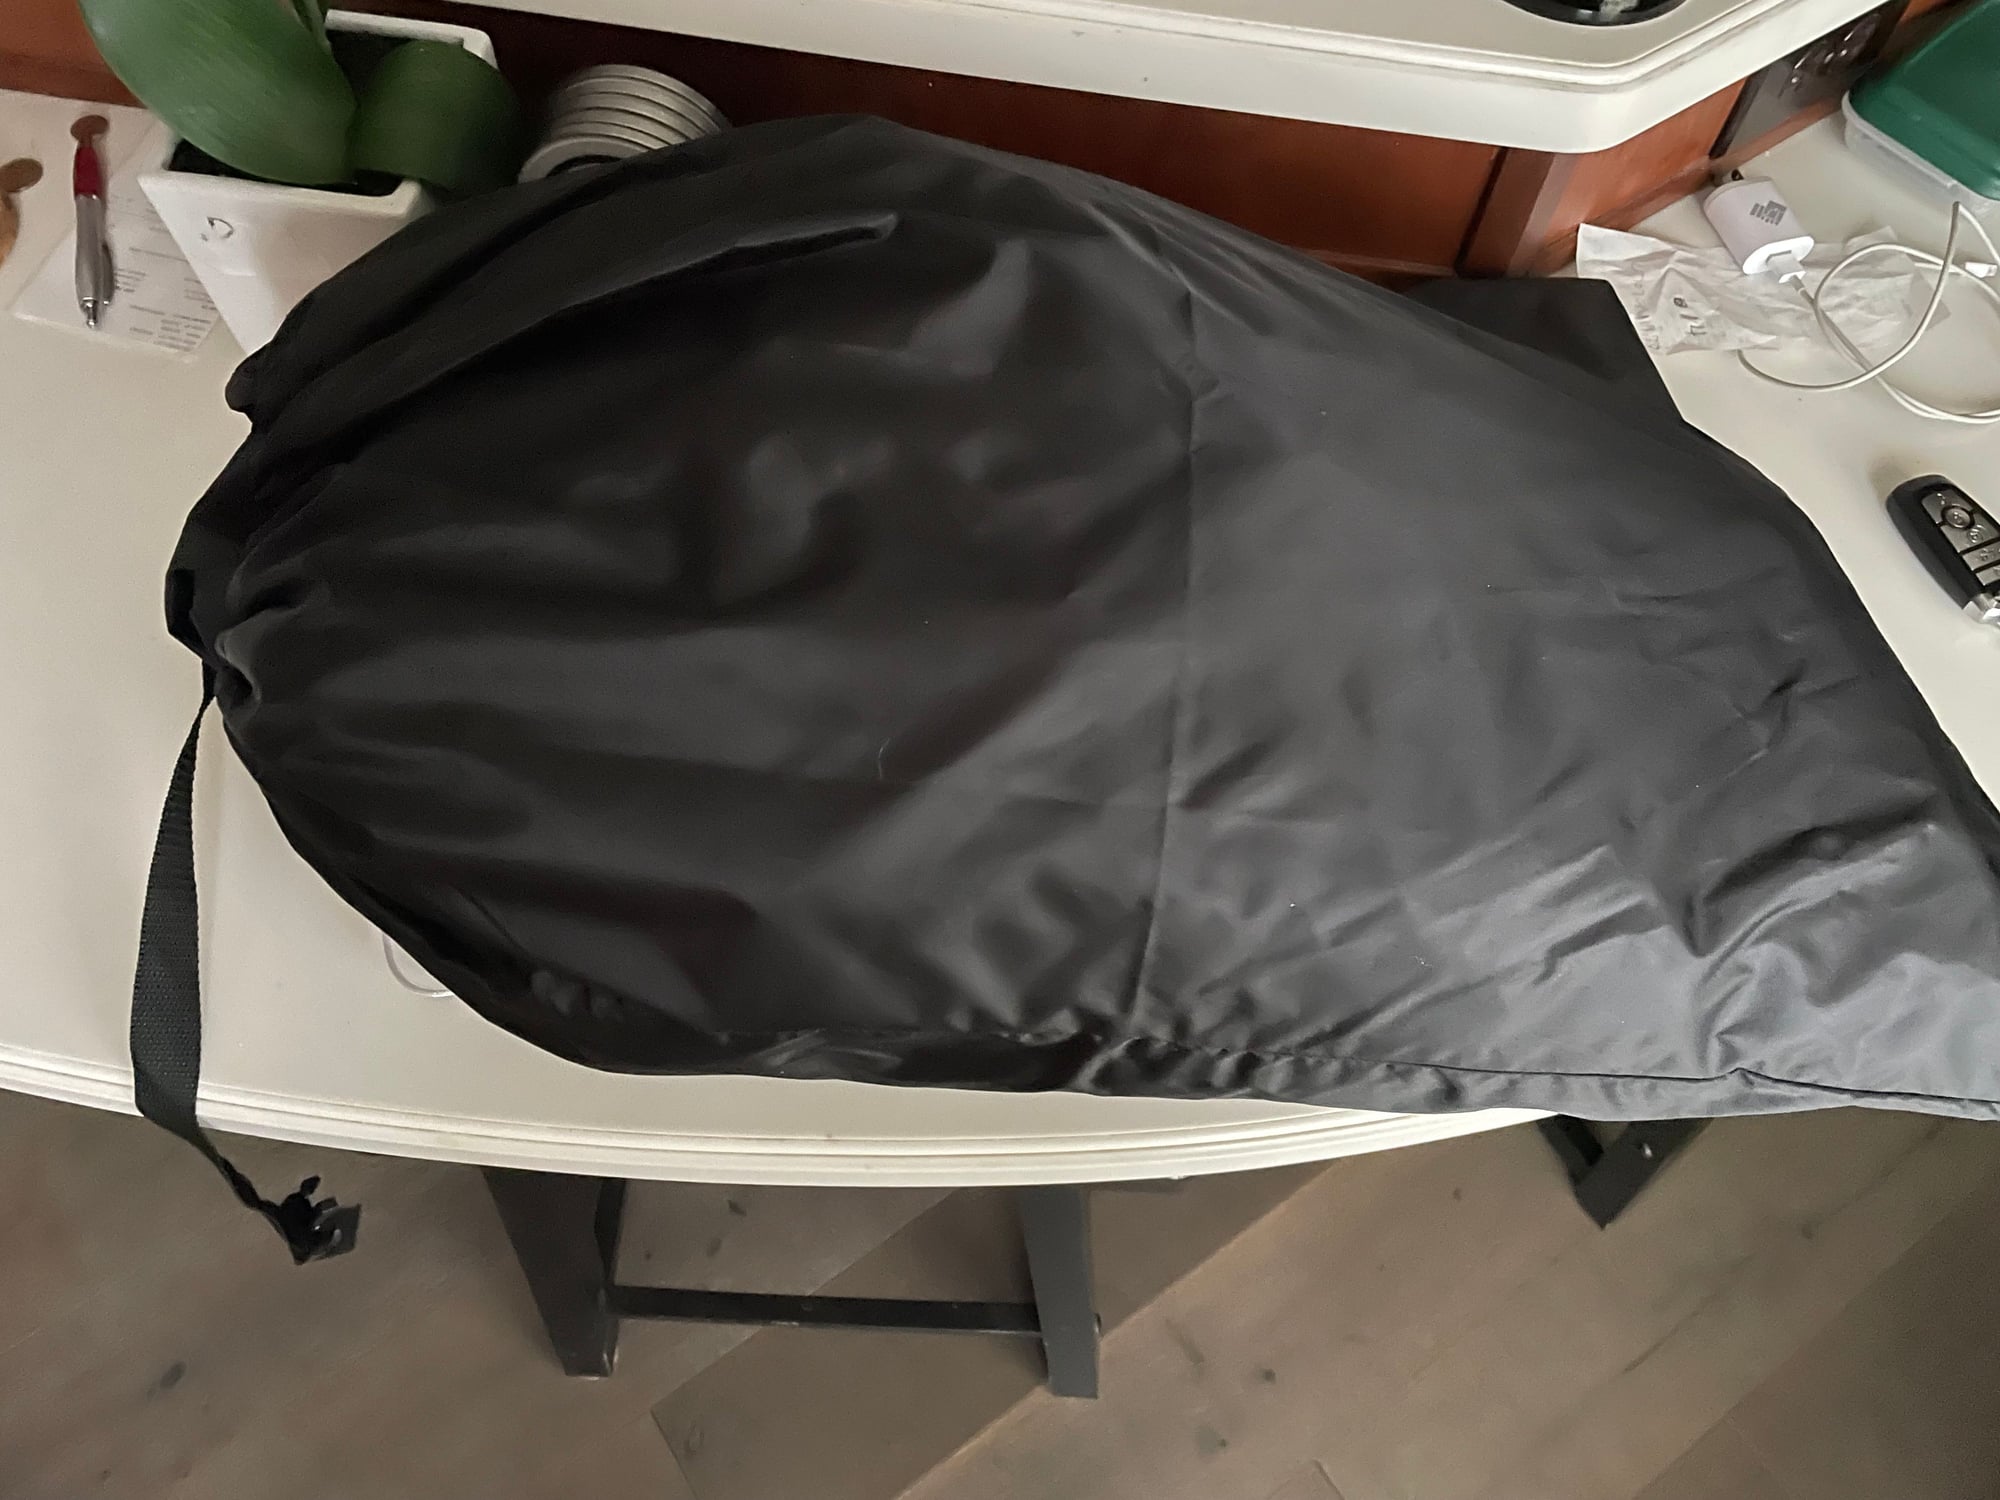 Accessories - F-type Outdoor car cover - Used - 2015 to 2019 Jaguar F-Type - Louisville, KY 40299, United States